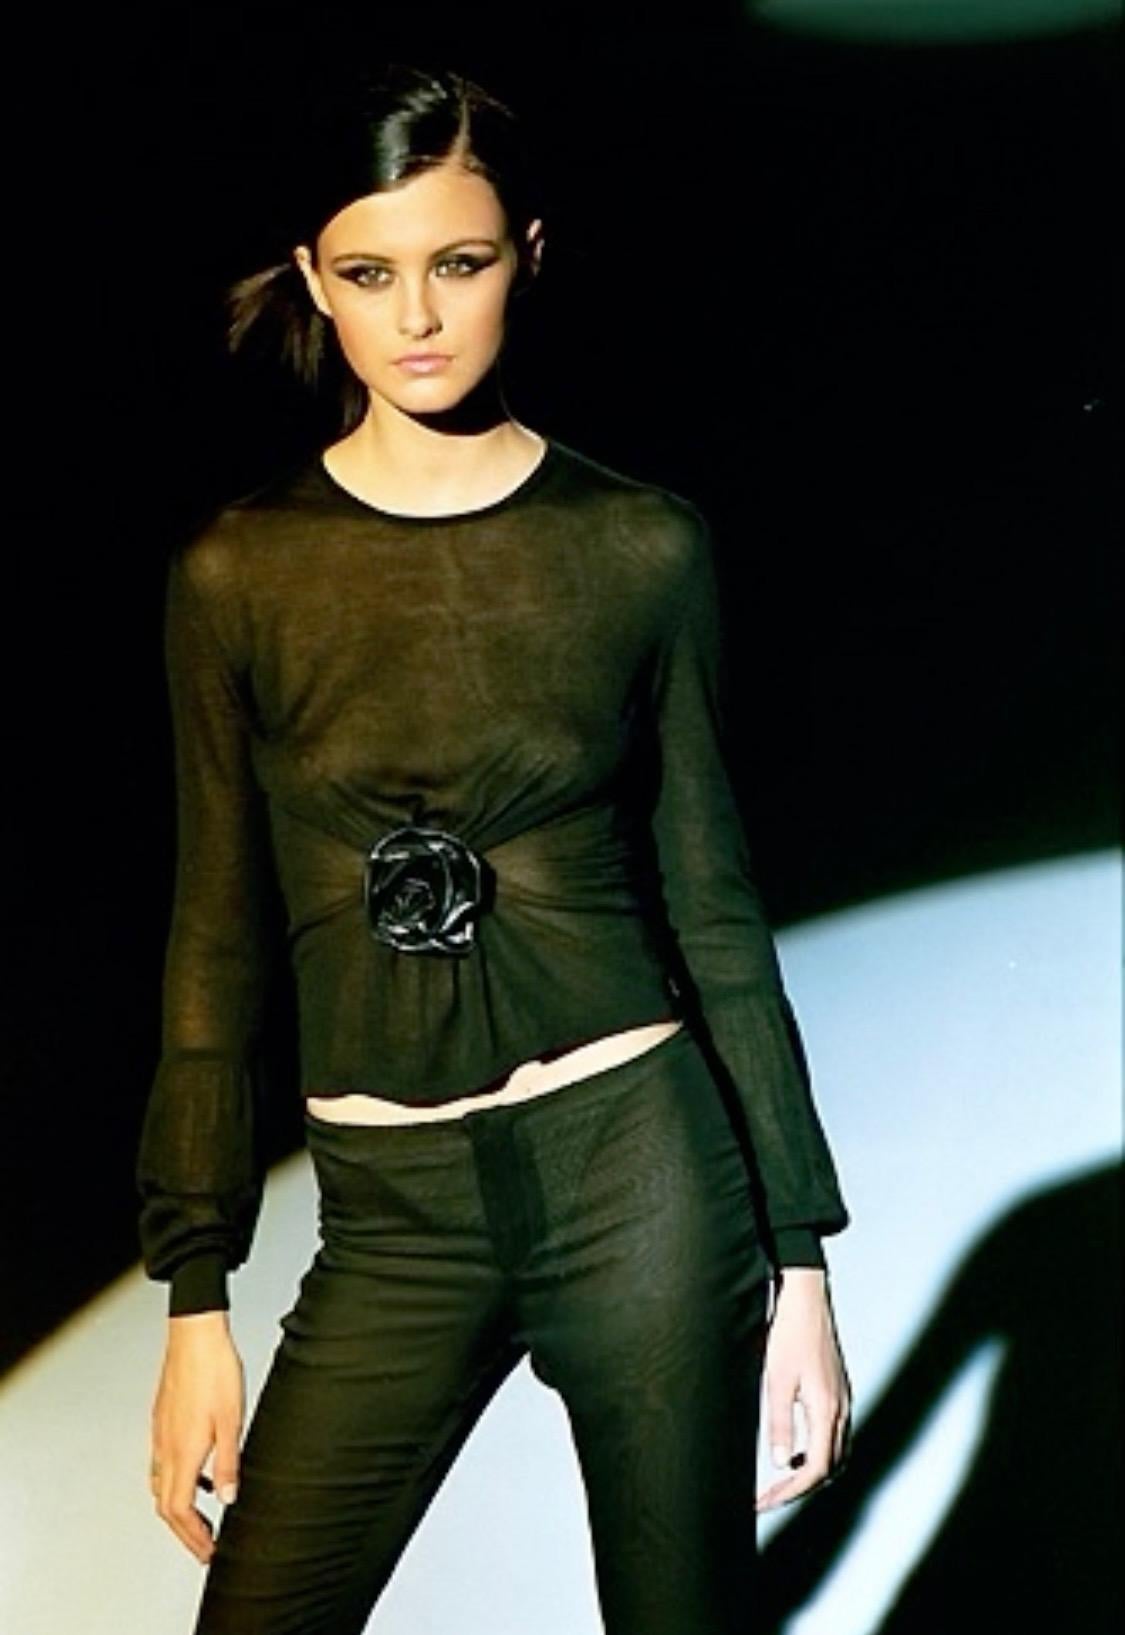 Presenting a beautiful semi-sheer Gucci blouse with a leather flower applique, designed by Tom Ford. From the Fall/Winter 1999 collection, this top debuted on the season's runway and was also used in the season's ad campaign photographed by Mario